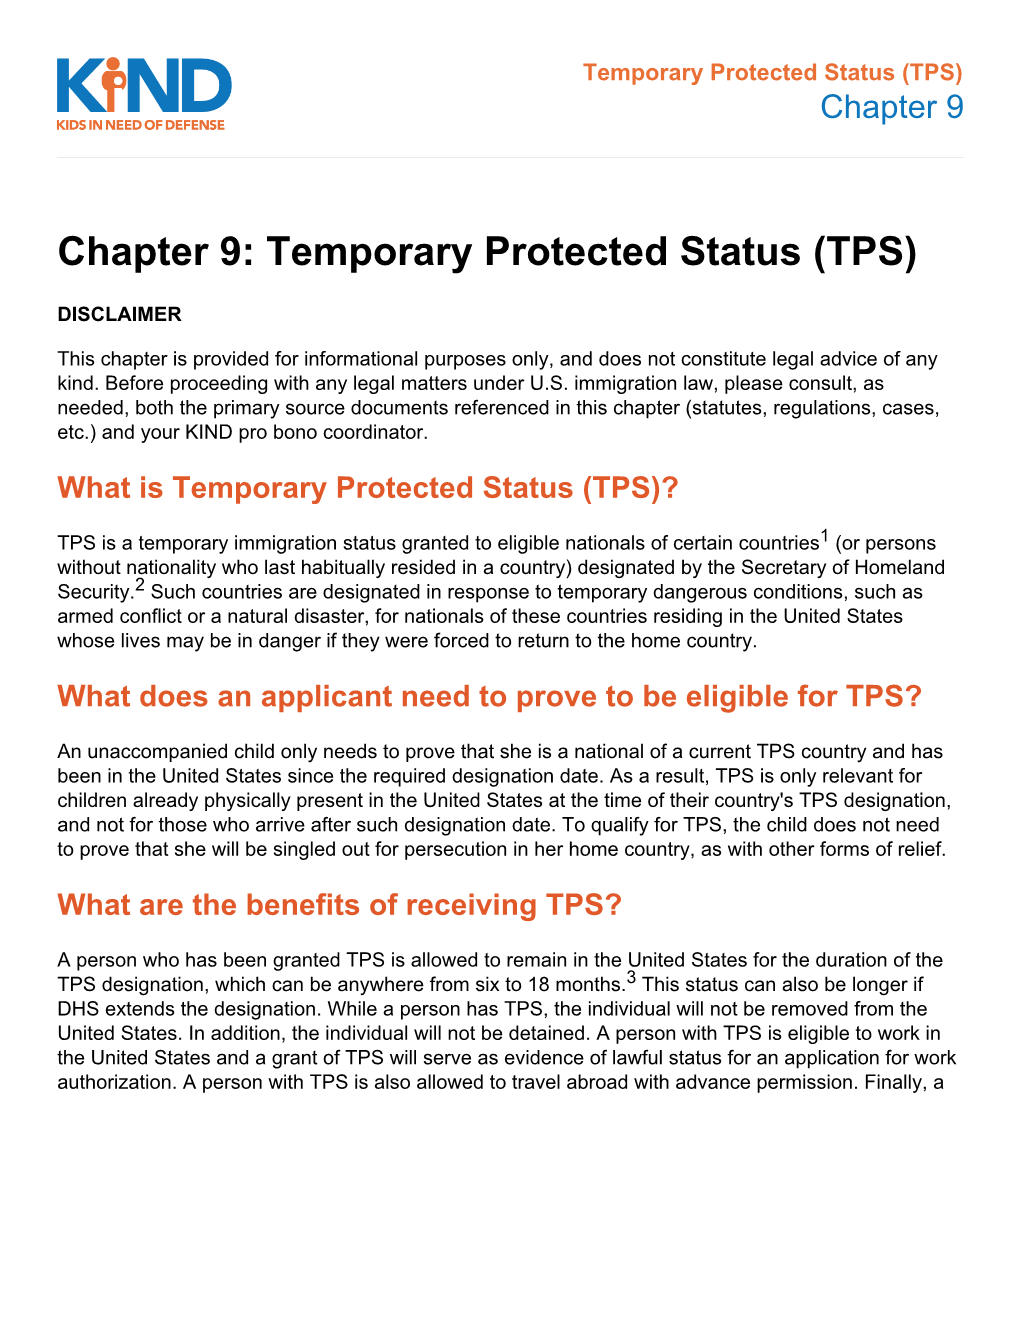 Chapter 9: Temporary Protected Status (TPS)